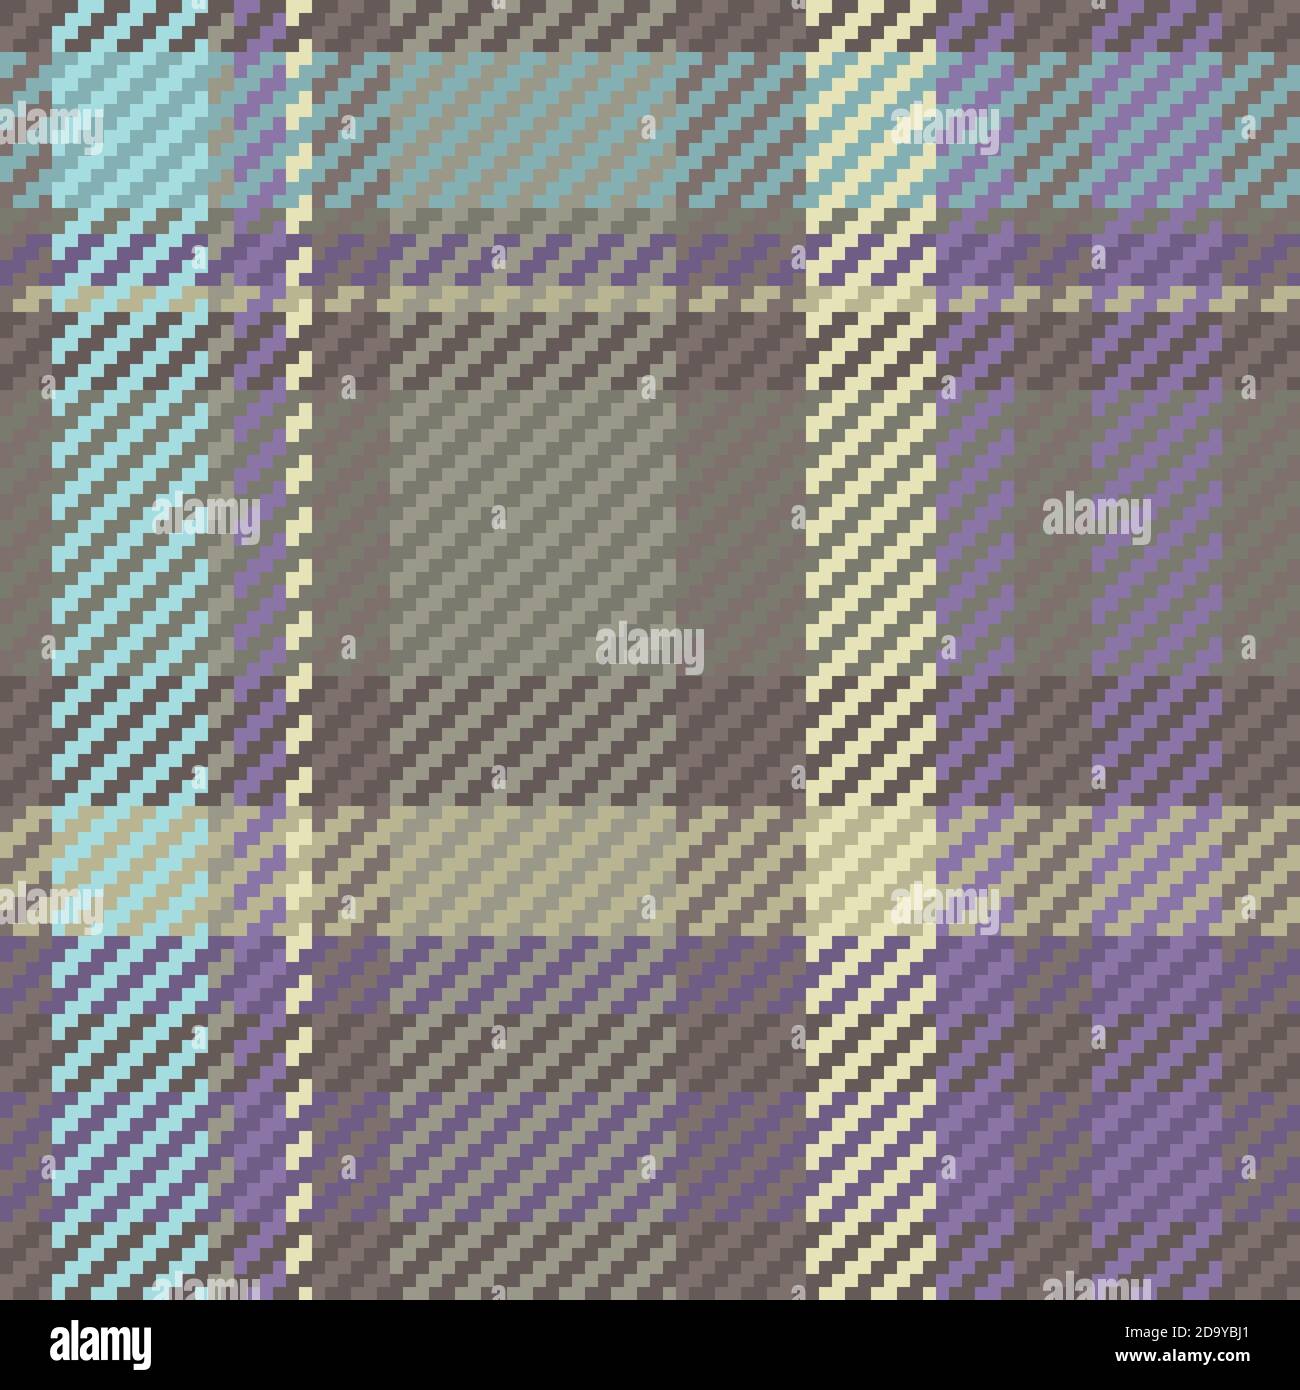 Seamless pattern of scottish tartan plaid. Repeatable background with check fabric texture. Flat vector backdrop of striped textile print. Stock Vector